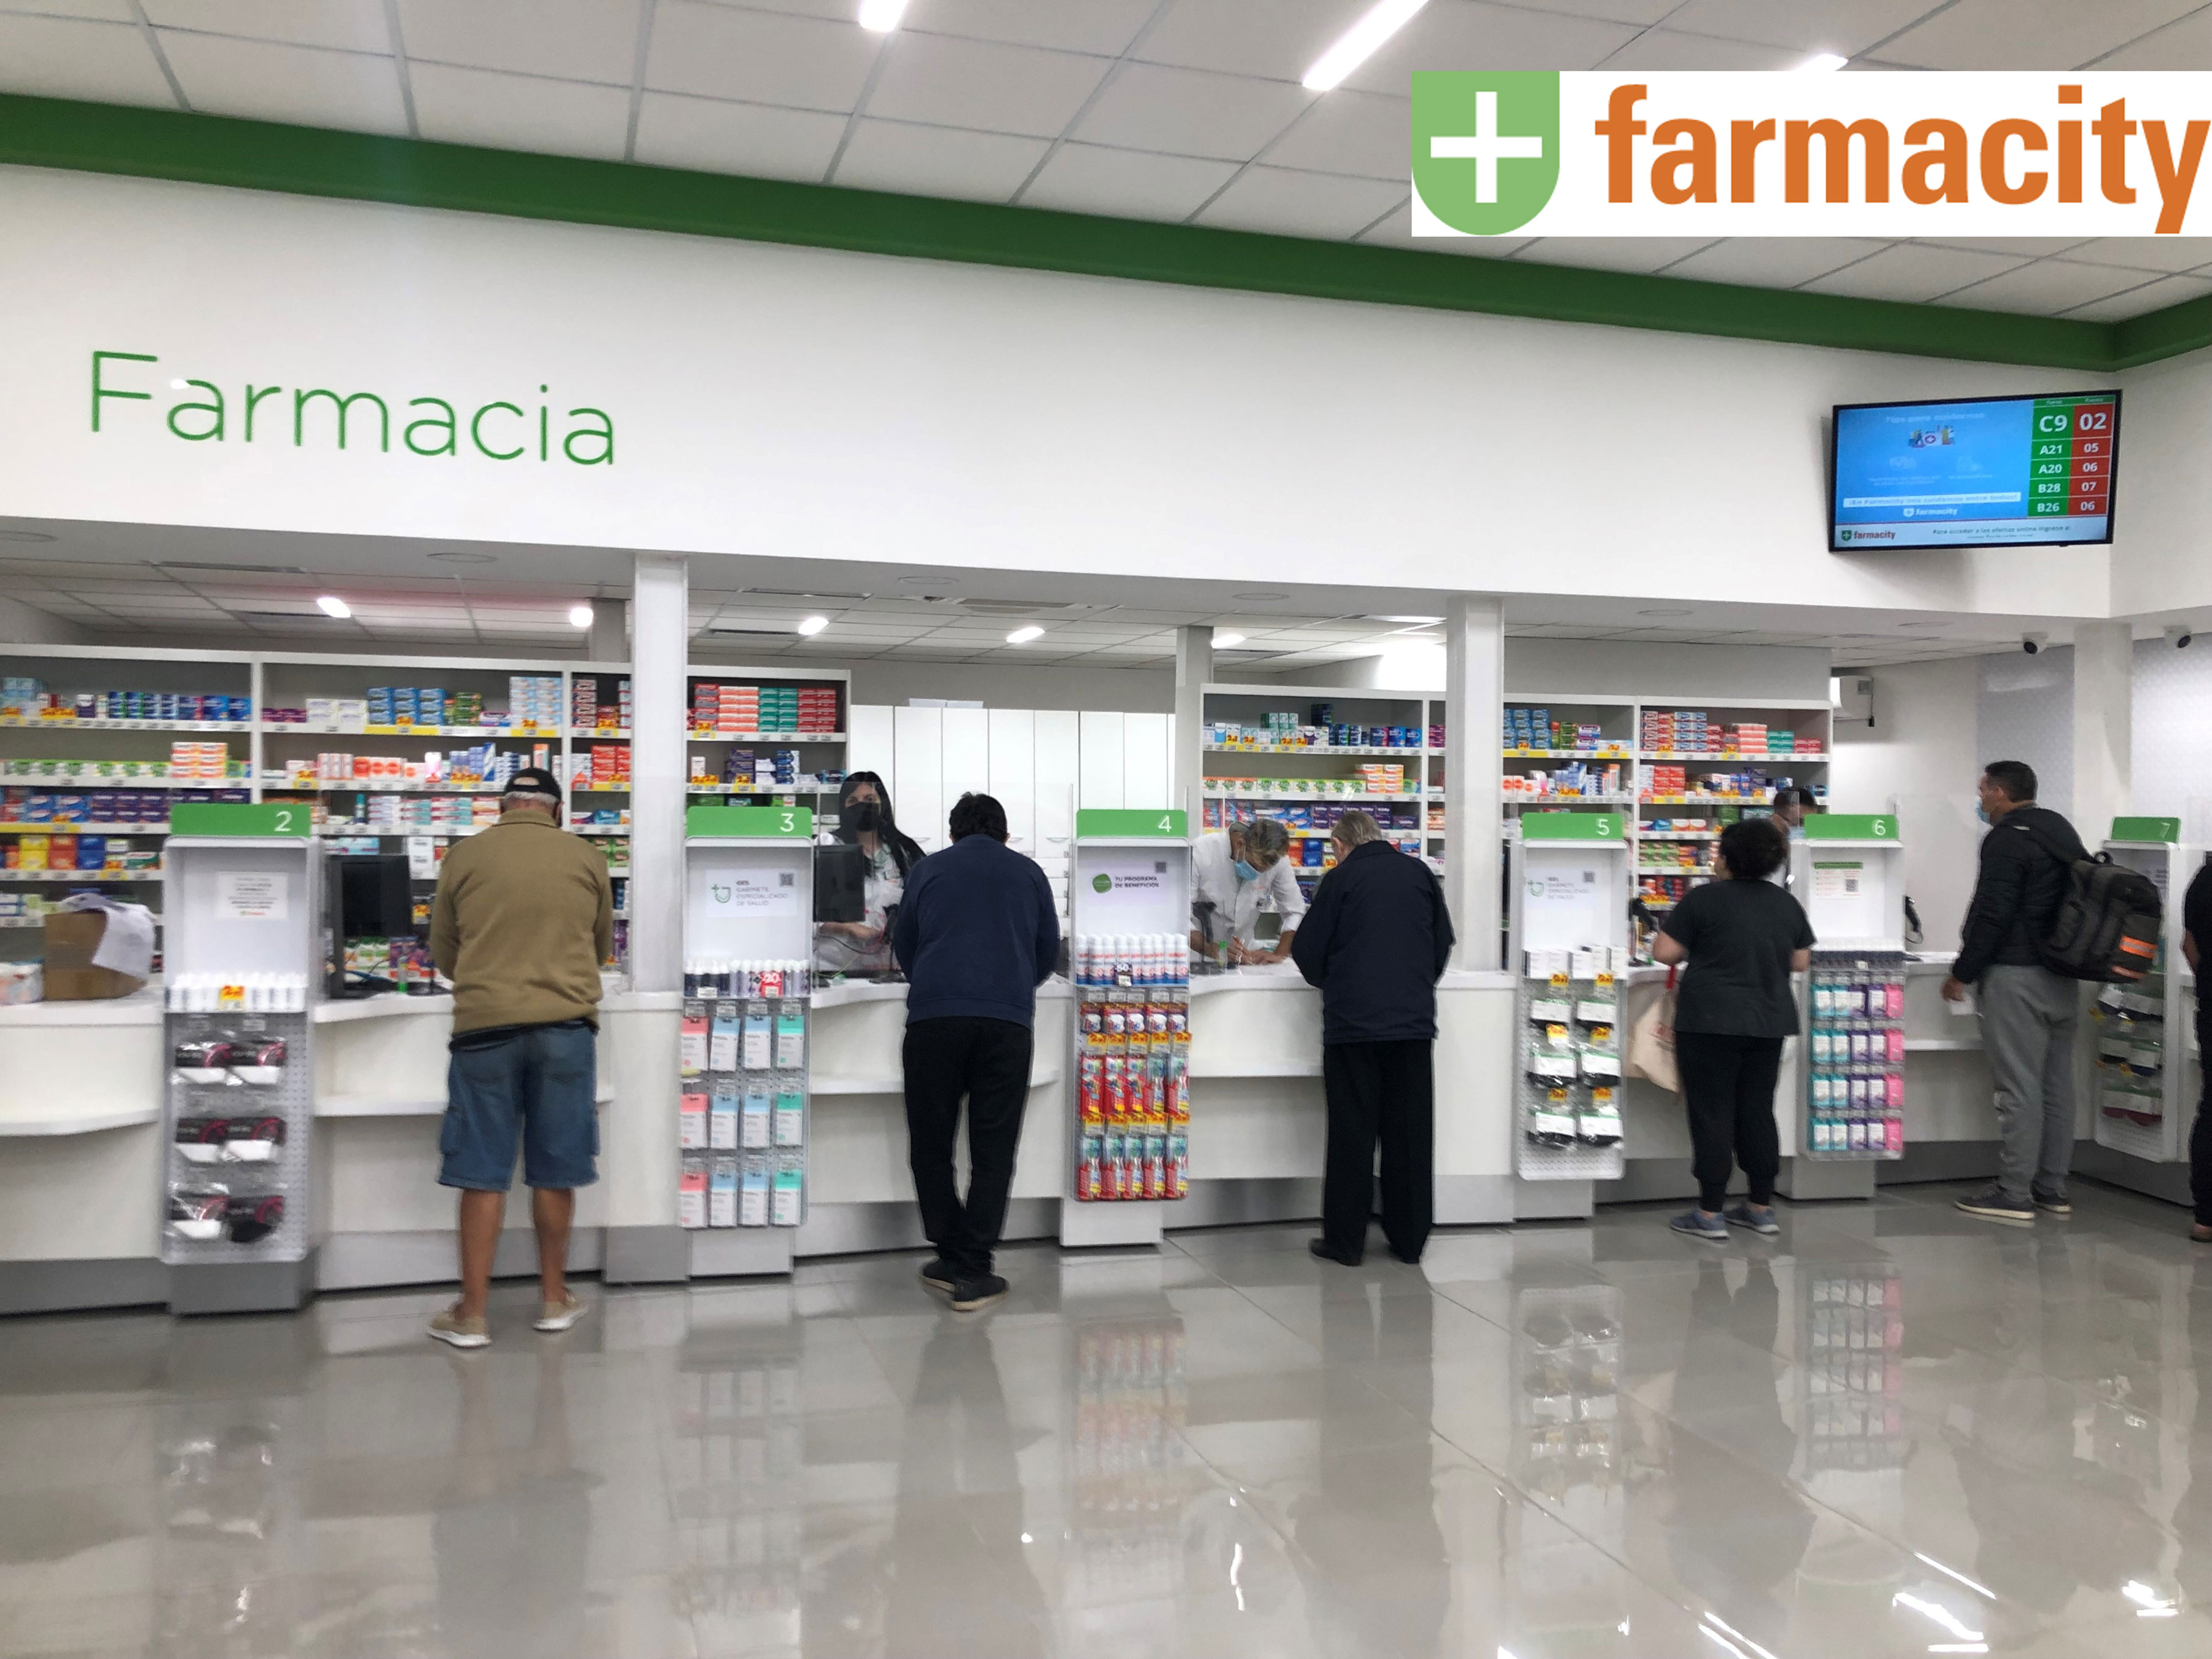 Farmacity counter with several customers.